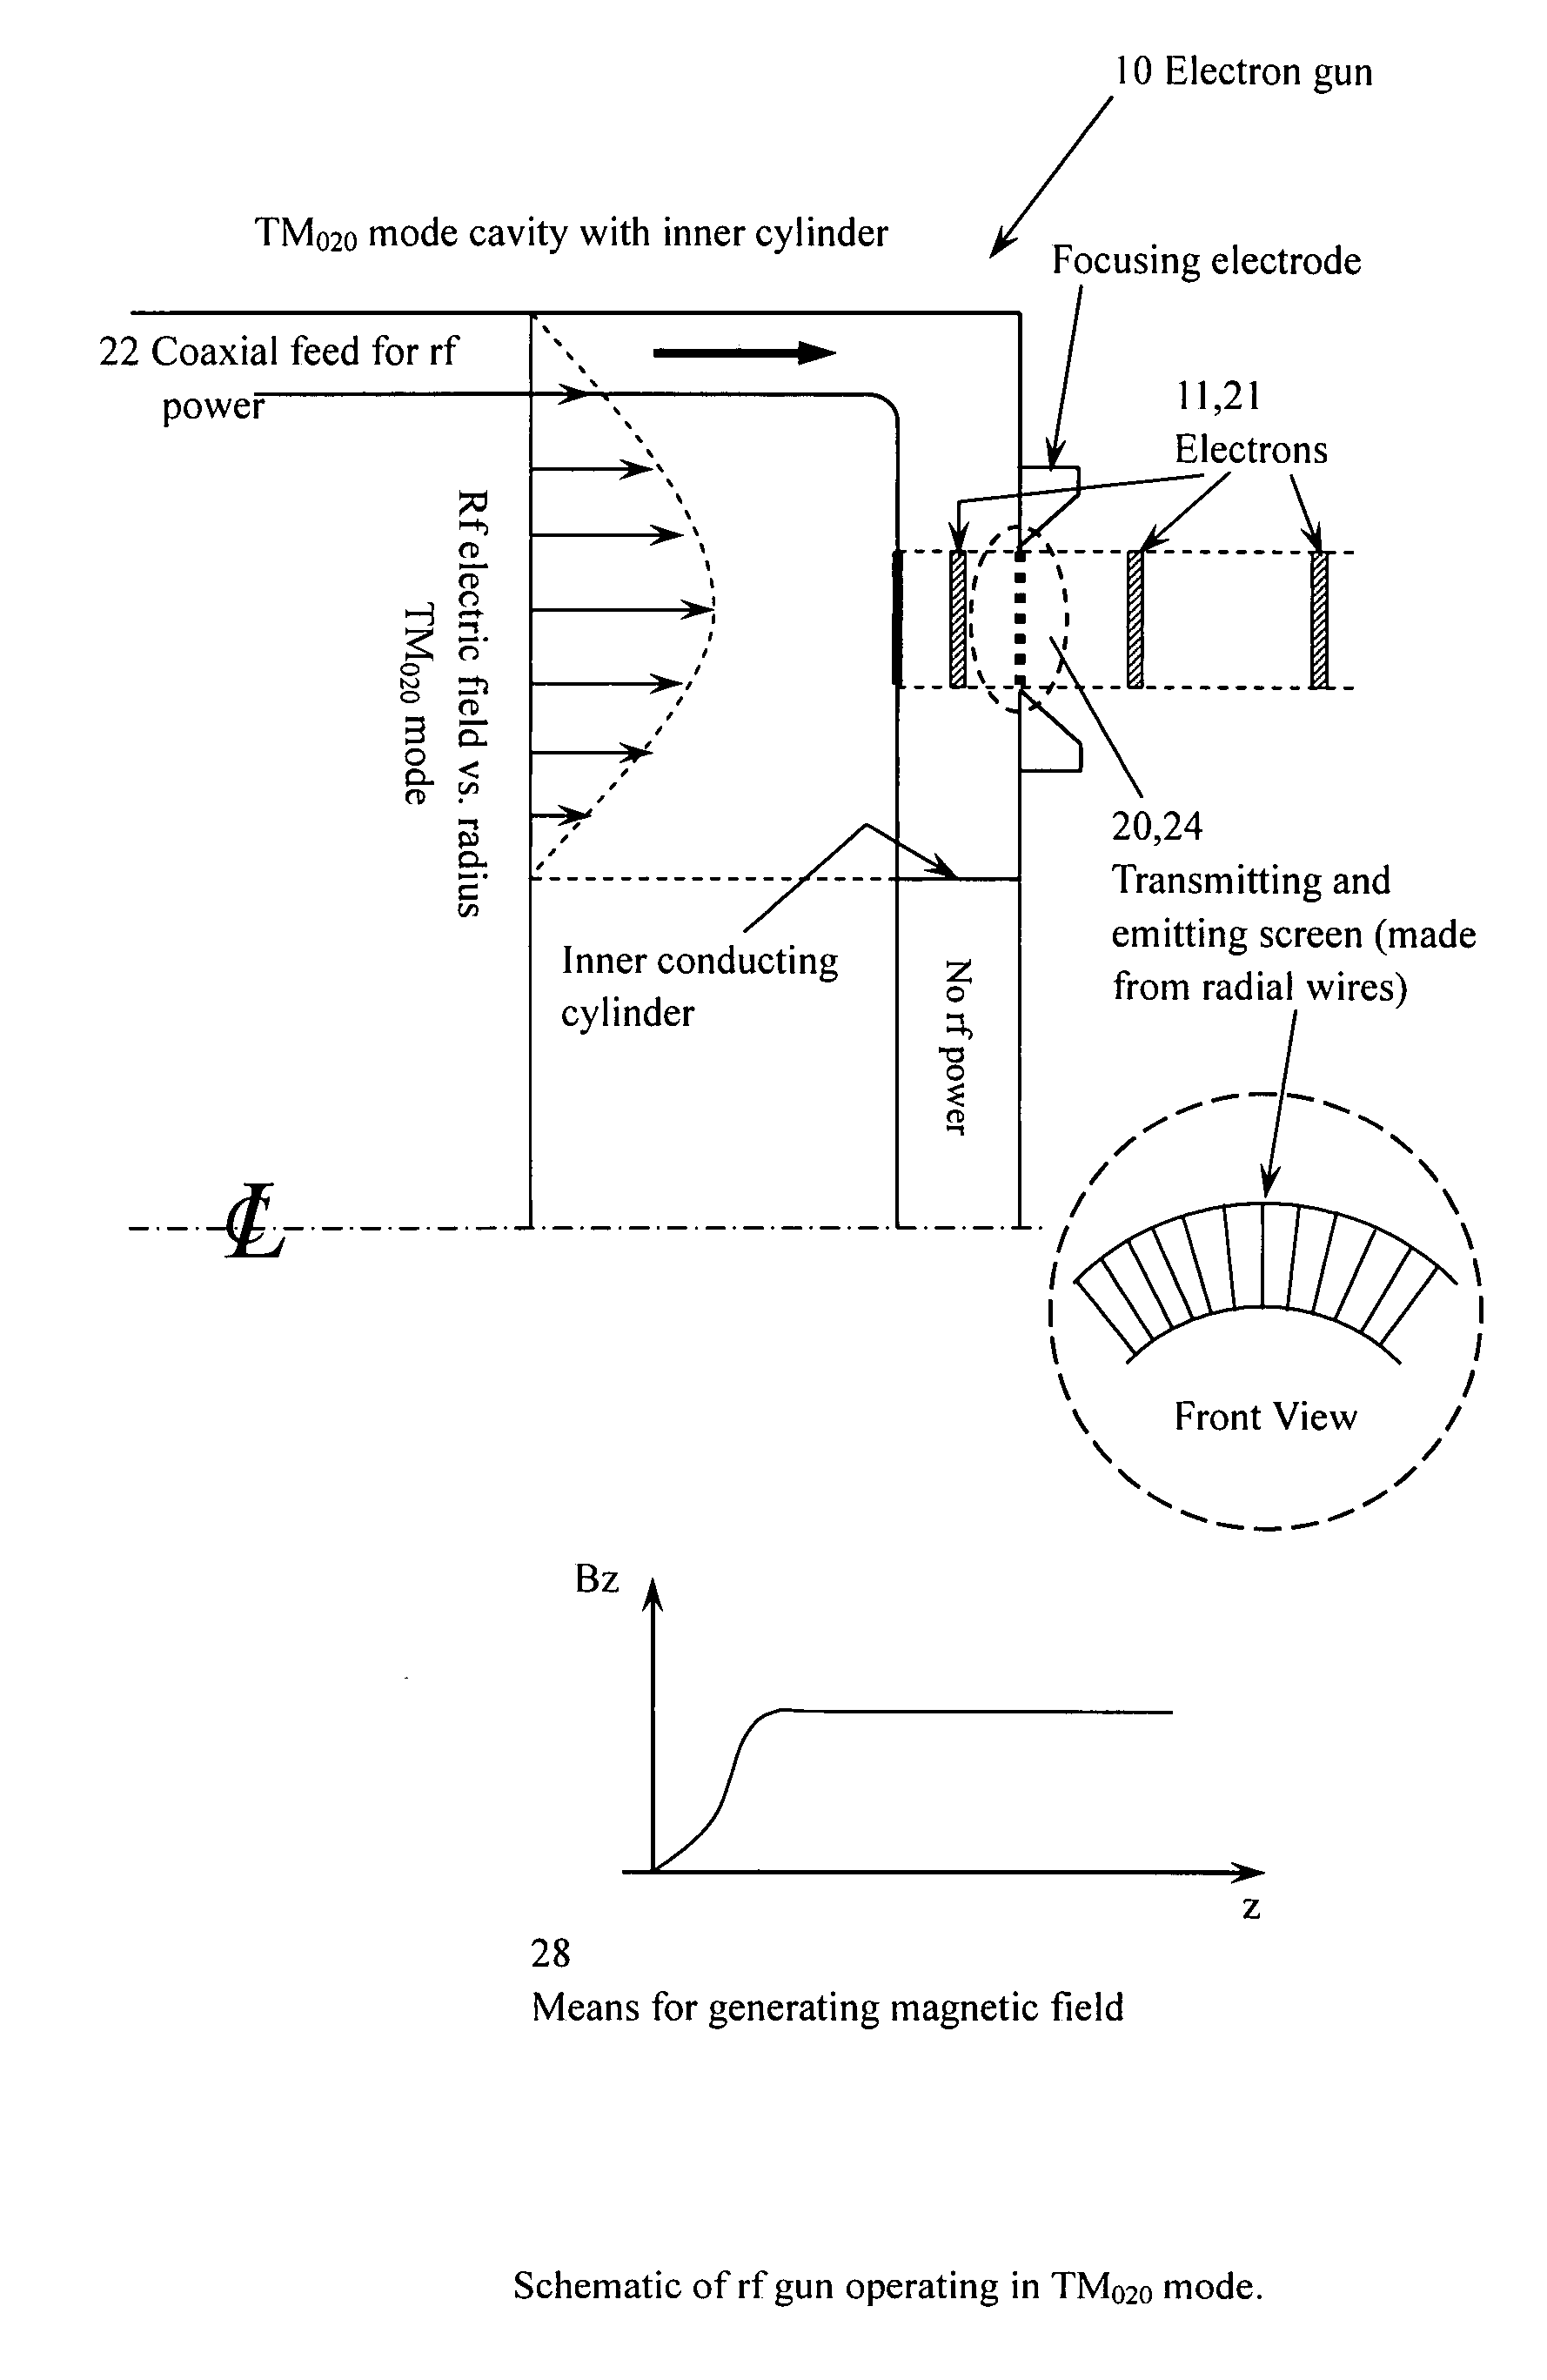 Electron gun for producing incident and secondary electrons